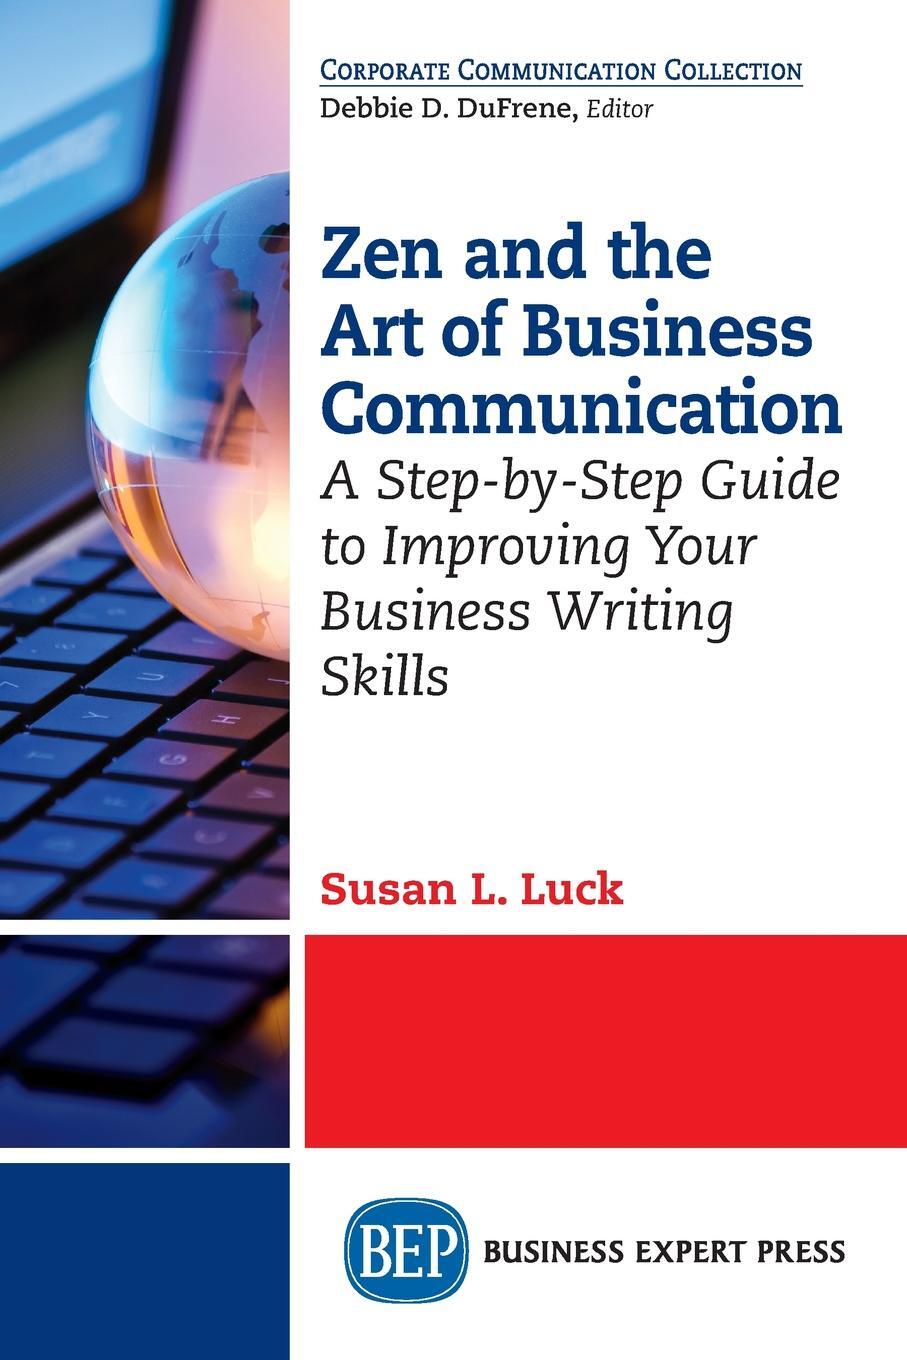 фото Zen and the Art of Business Communication. A Step-by-Step Guide to Improving Your Business Writing Skills